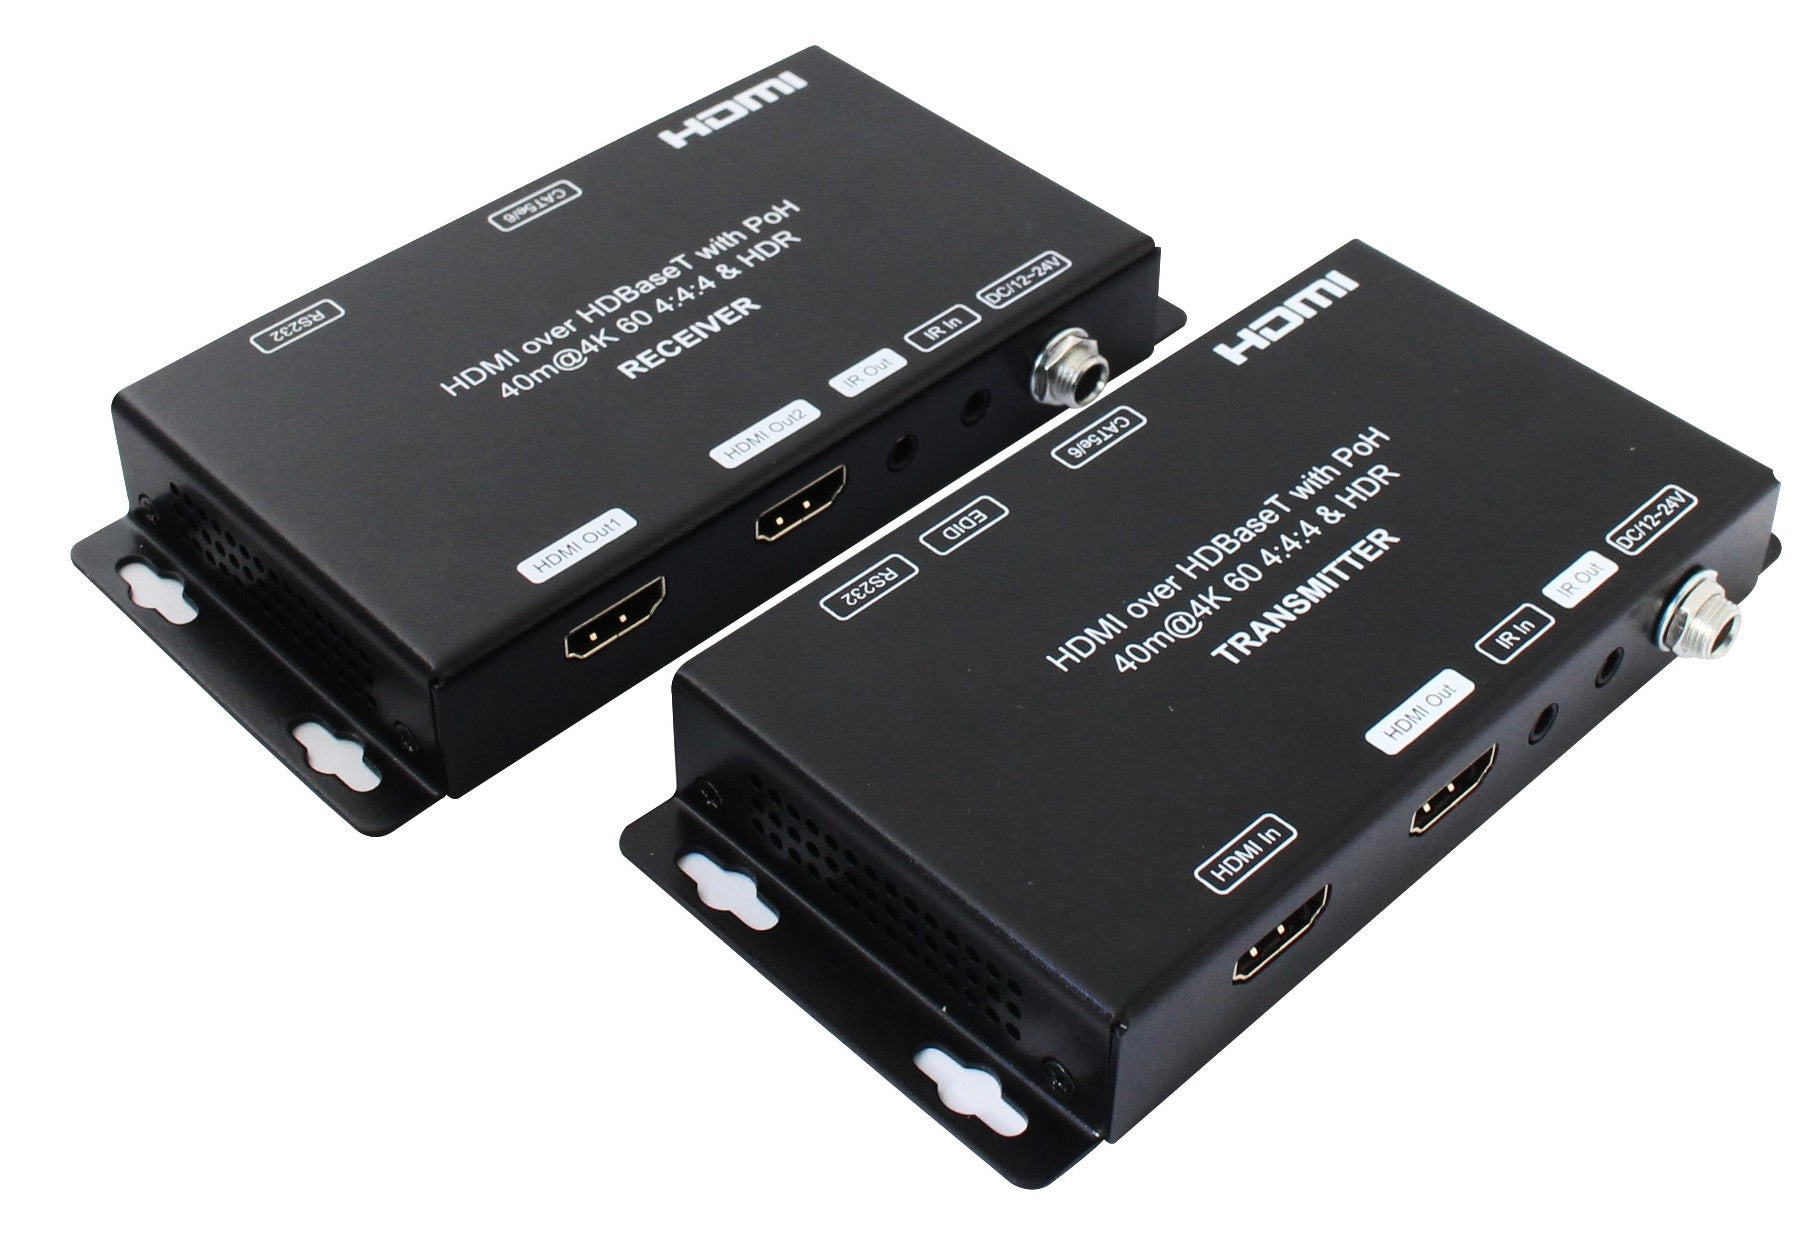 16-6700-08 4K HDMI Slim Extender HDBaseT YUV 4:4:4 with Dual Power Over Cable (POC)